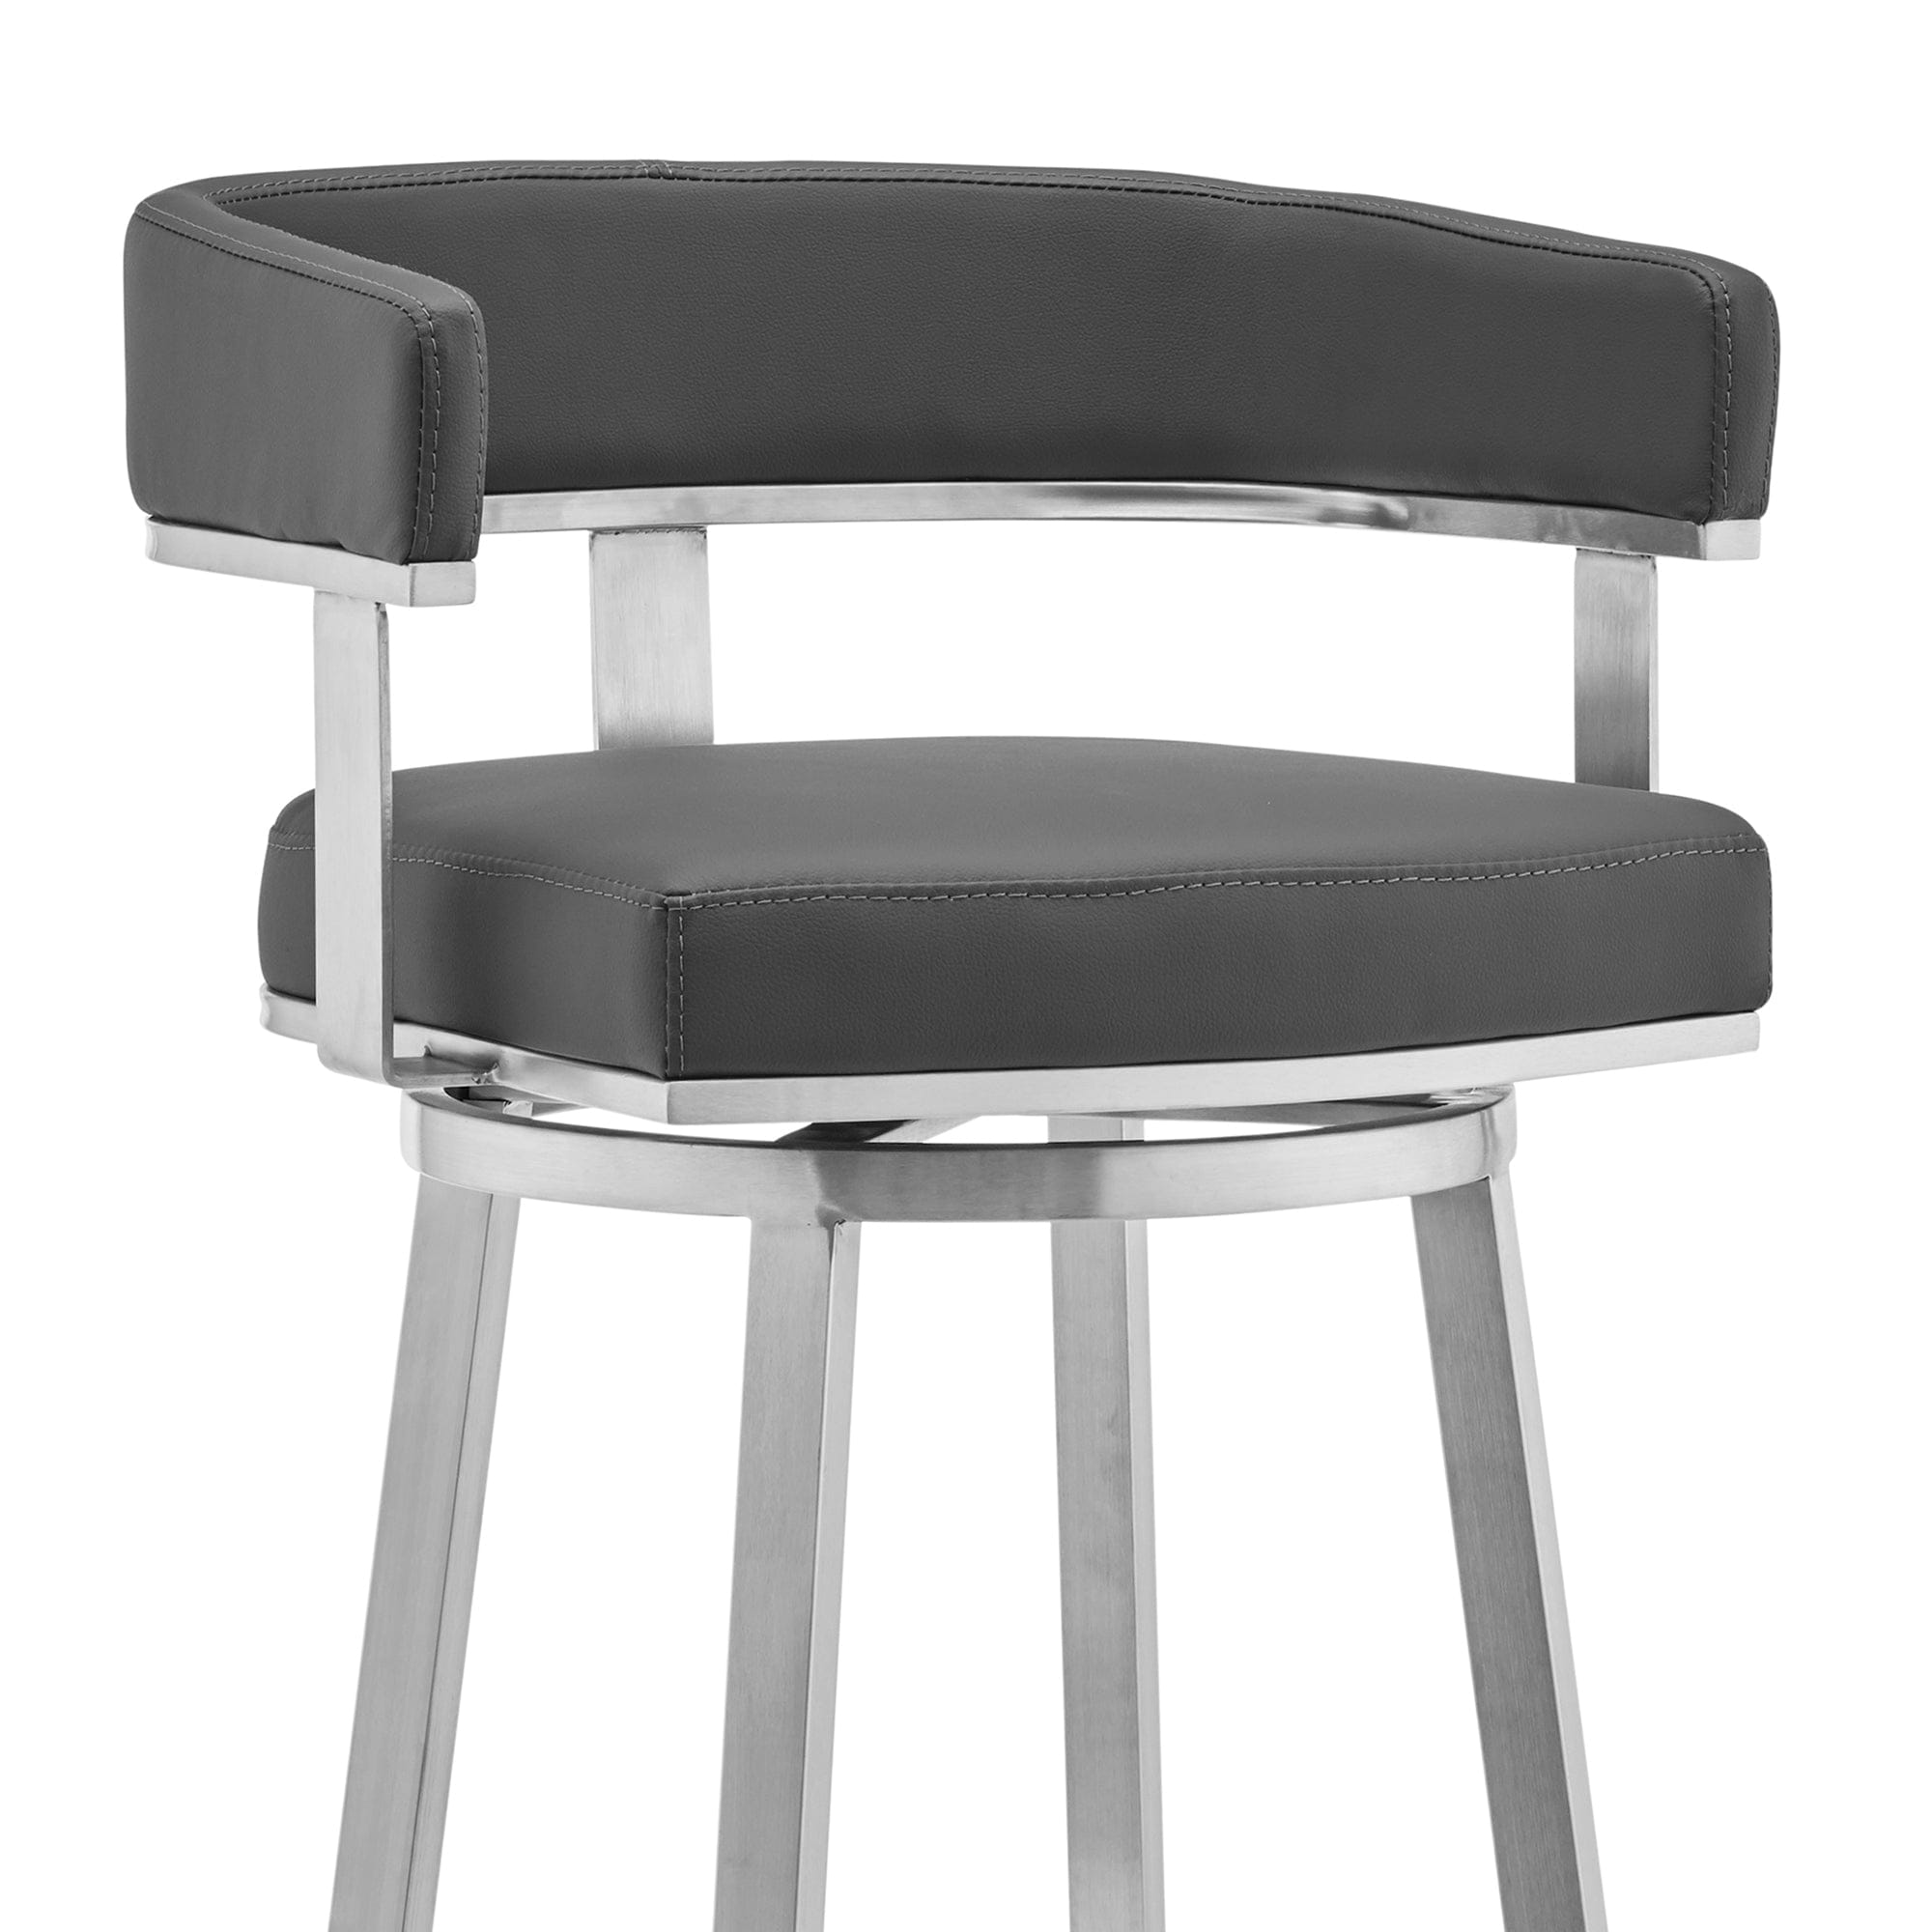 Armen Living Barstool Armen Living - Lorin 30" Black Faux Leather and Brushed Stainless Steel Swivel Bar Stool | LCLRBABSBL30